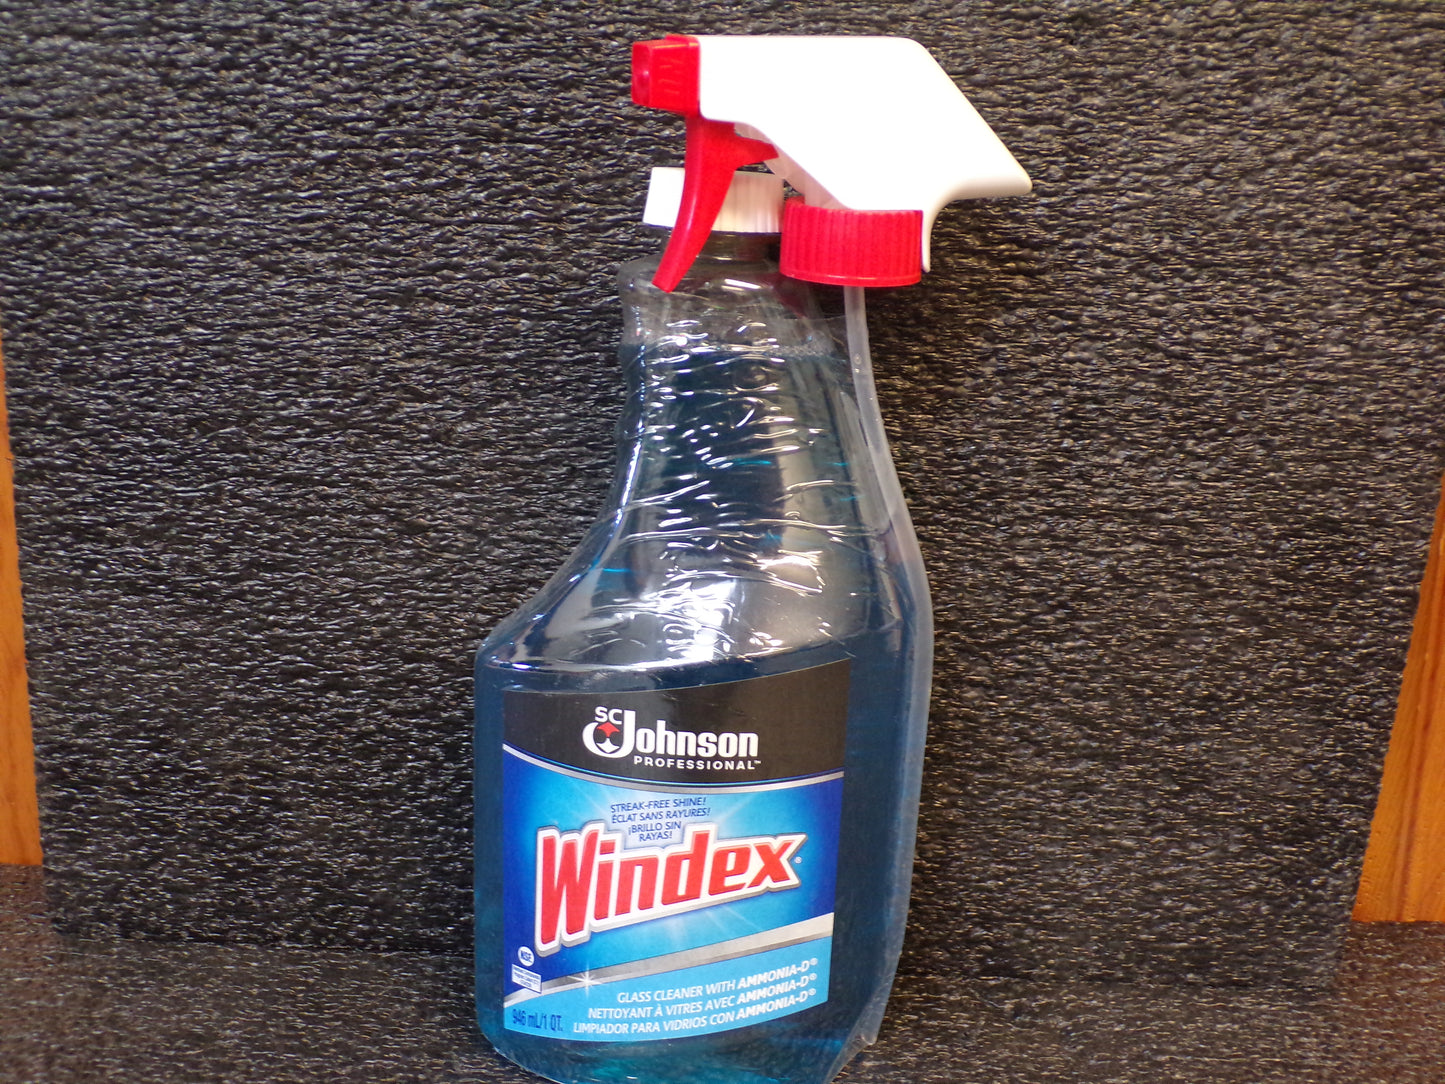 Windex 32 oz Glass Cleaner with Ammonia-D Capped with Trigger (CR00018-K02)